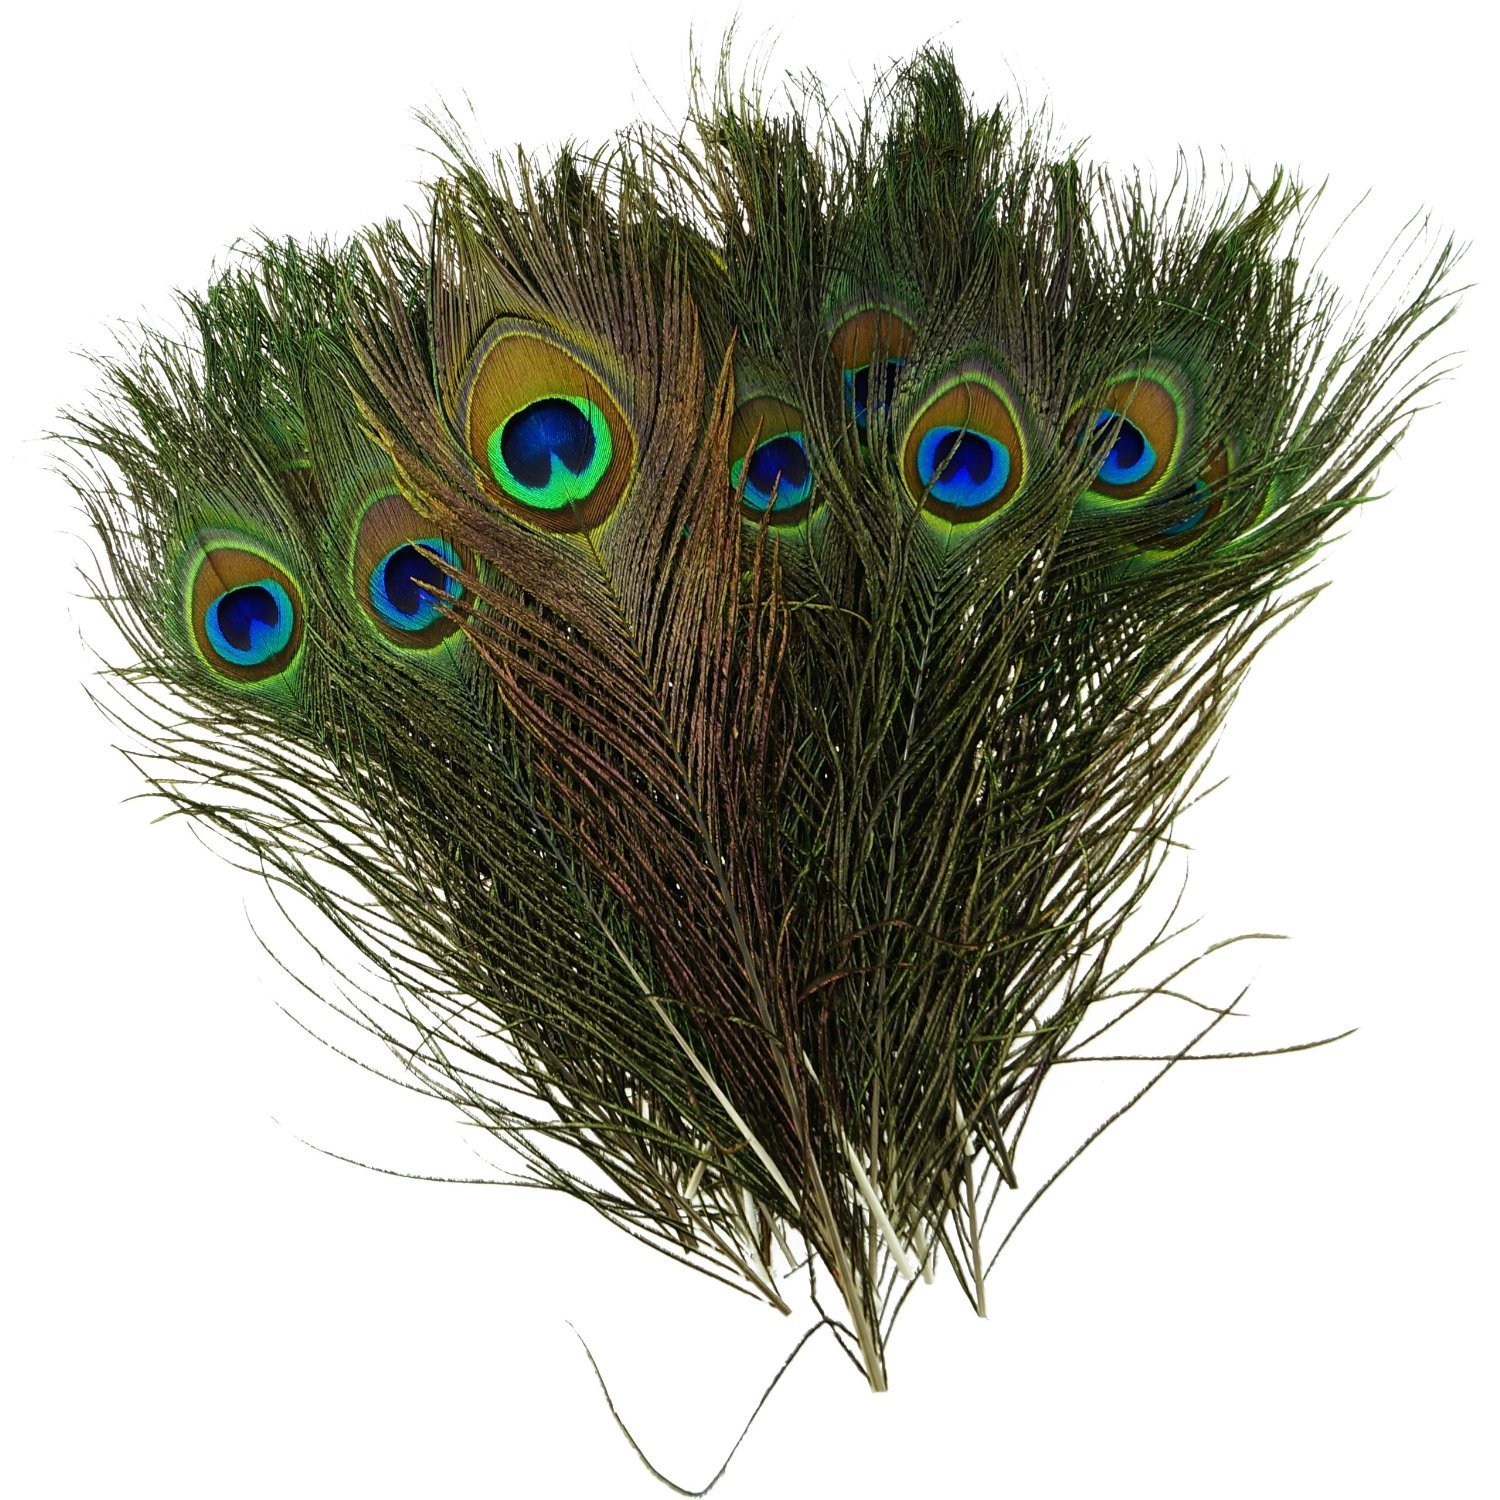 Amazon.com: Pack of 50pc High Quality Real Natural Peacock Feathers ...